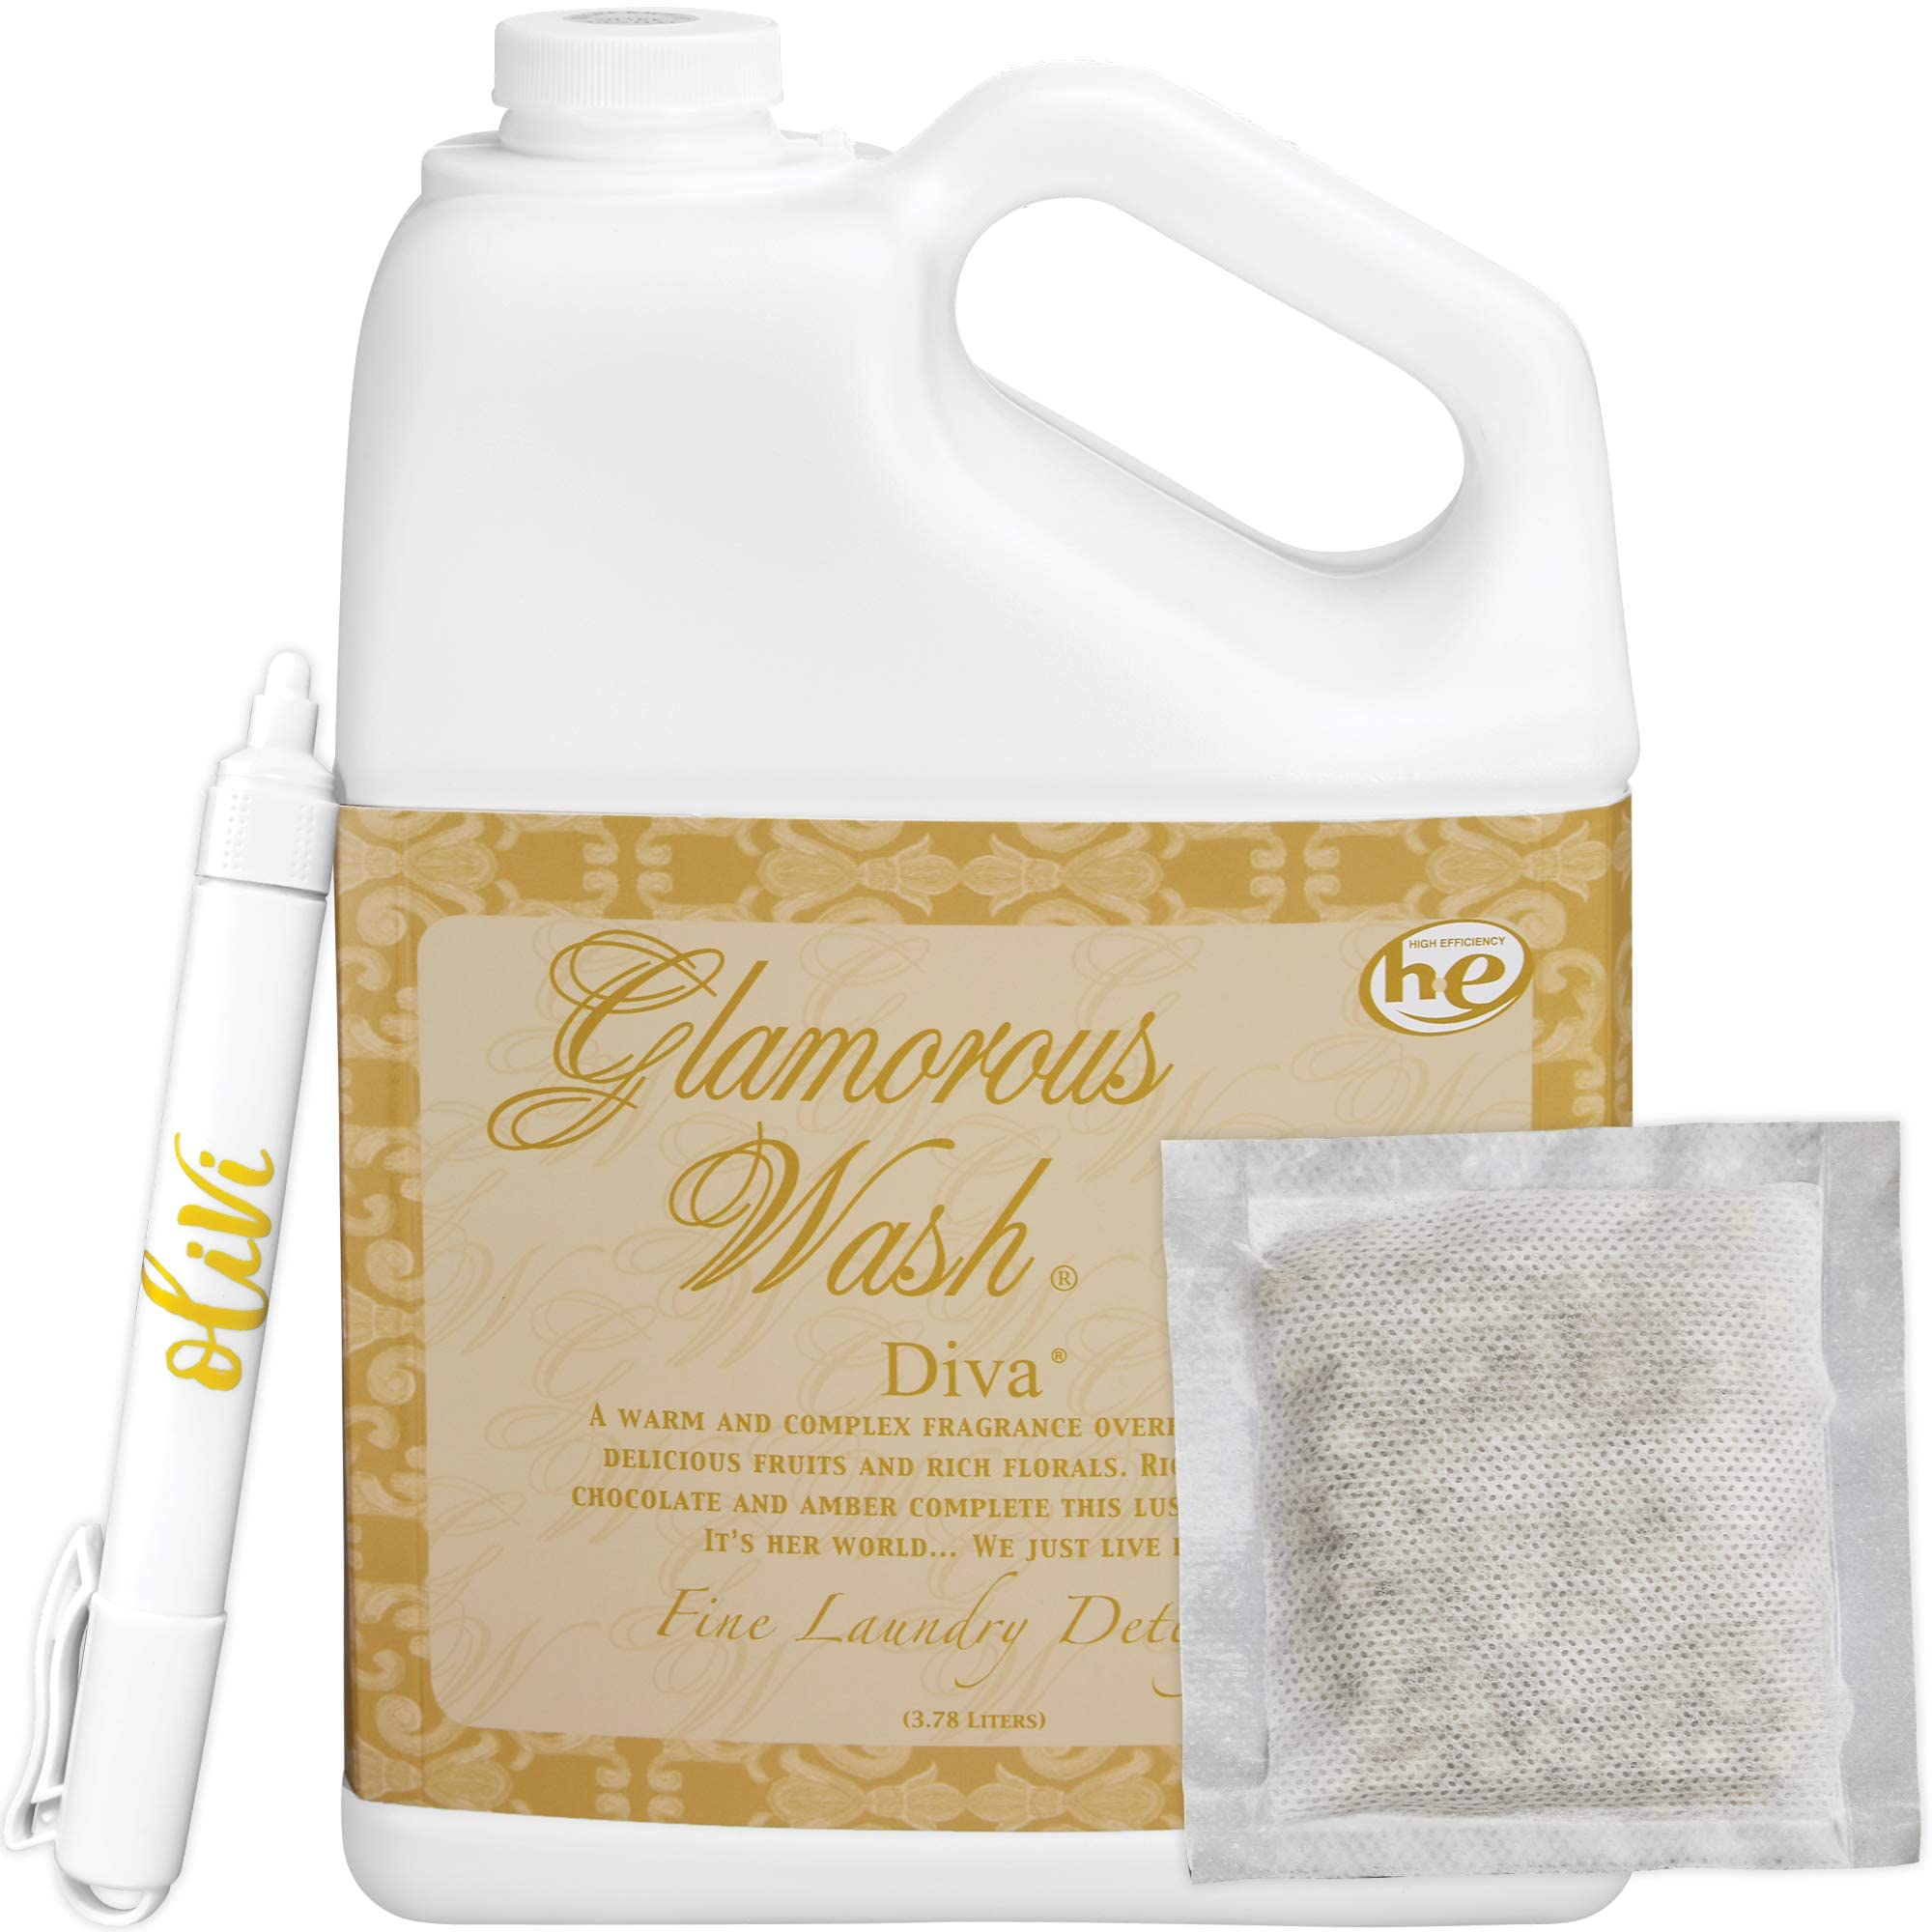 Tyler DIVA Glamorous Wash Laundry Detergent - 1 Gallon - With Olivi Stain Remover Pen - Fresh Scented Sachet - Laundry Detergent For Washing